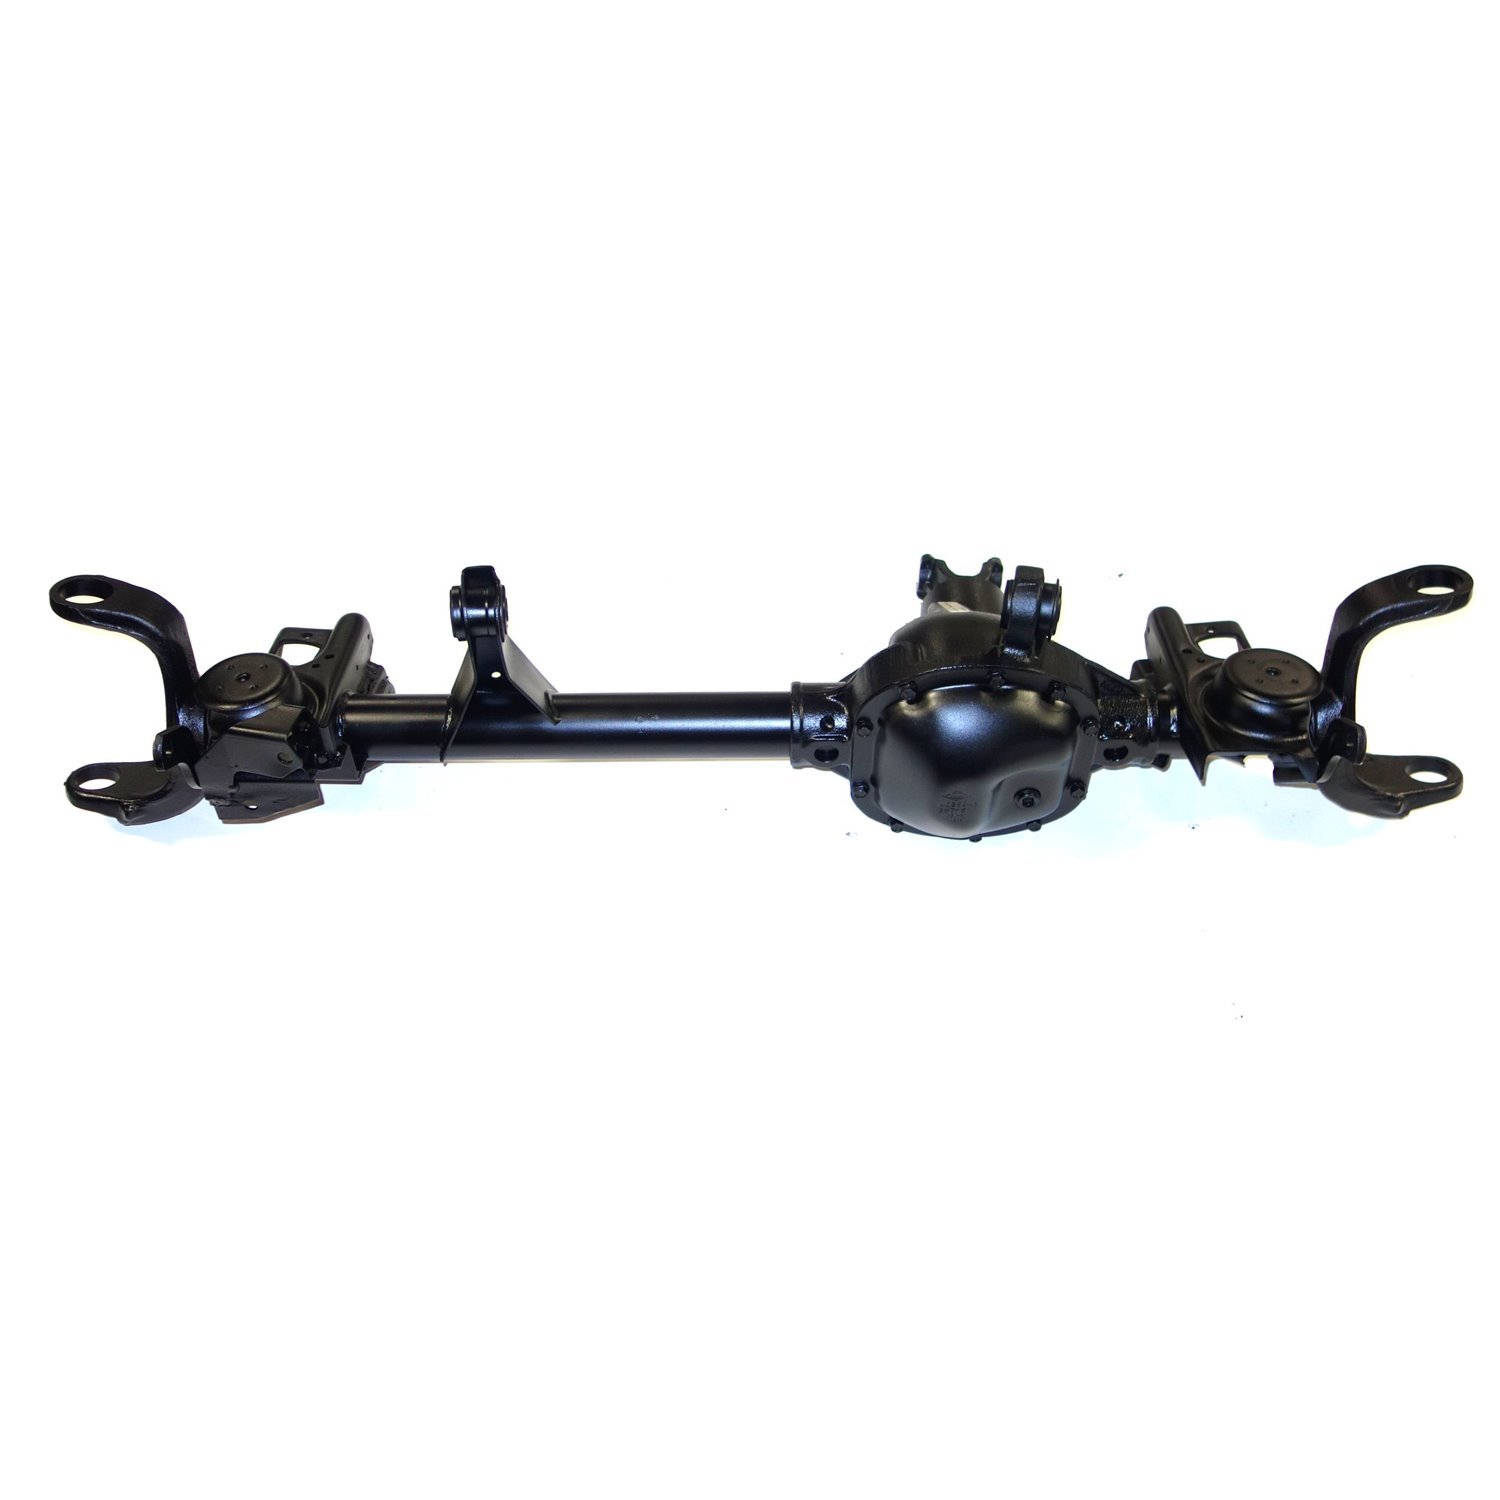 Remanufactured Complete Axle Assembly for Dana 30 87-89 Jeep Wrangler 3.08 Ratio